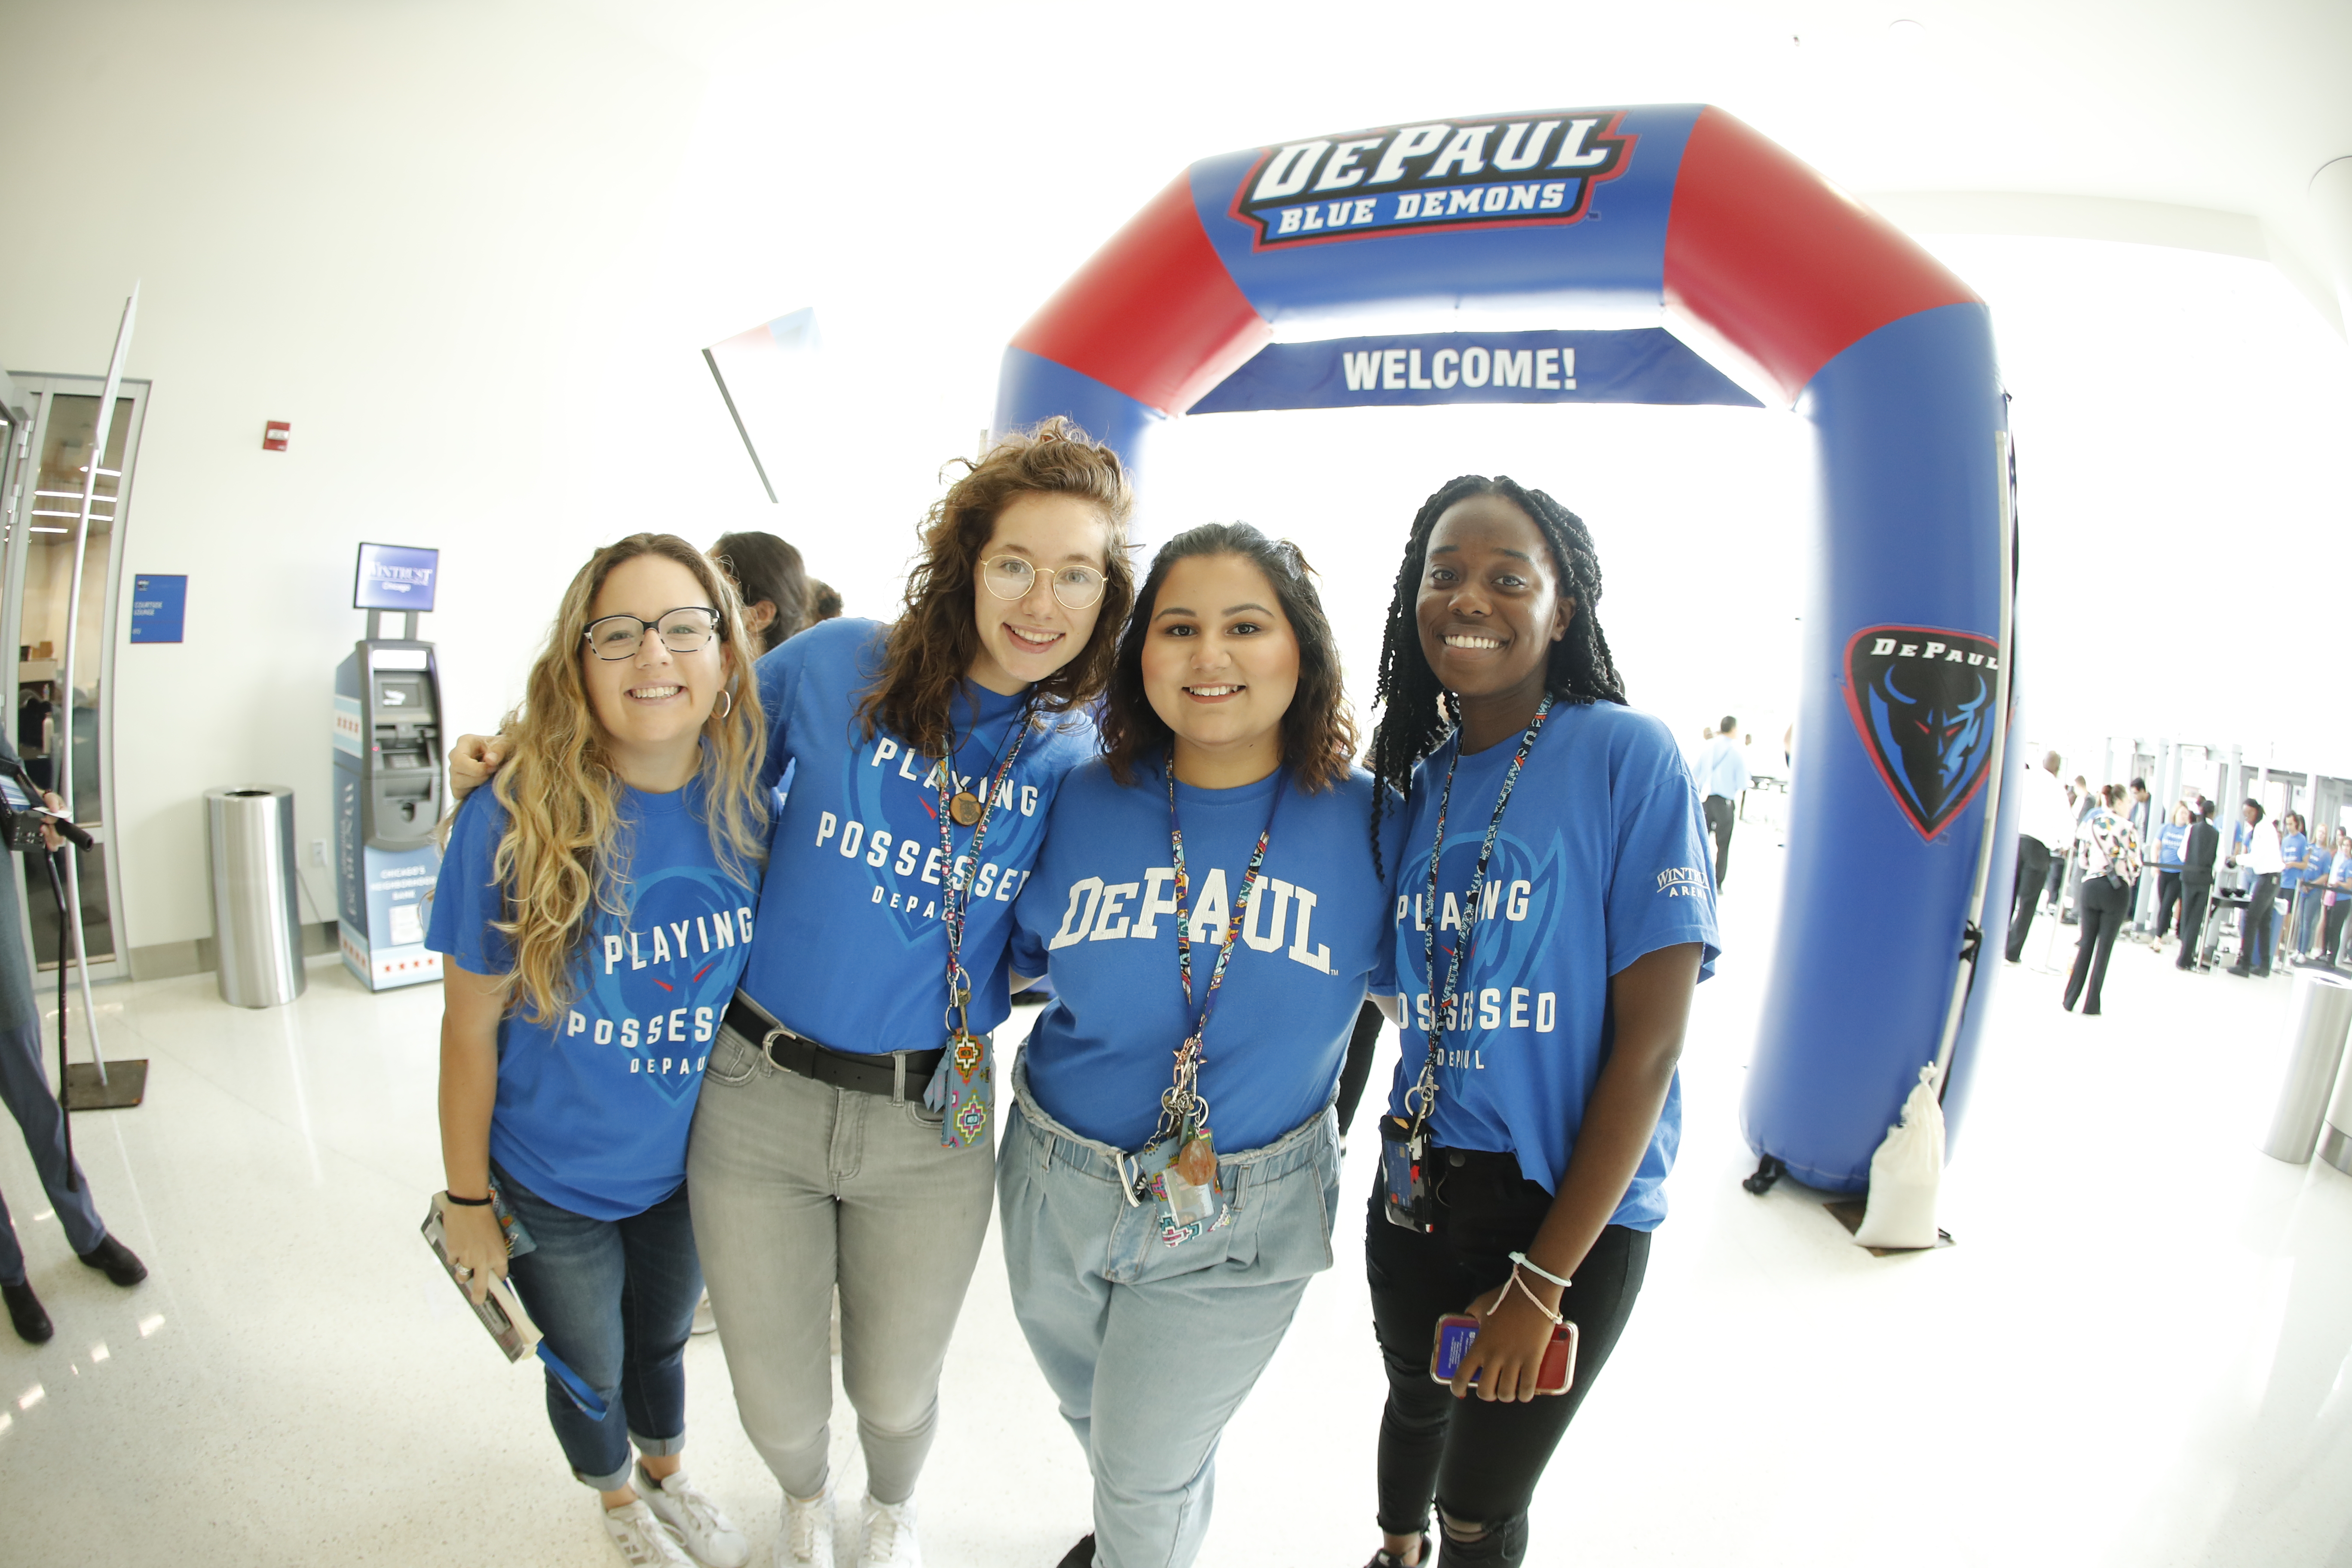 Blue Demon Welcome 2019